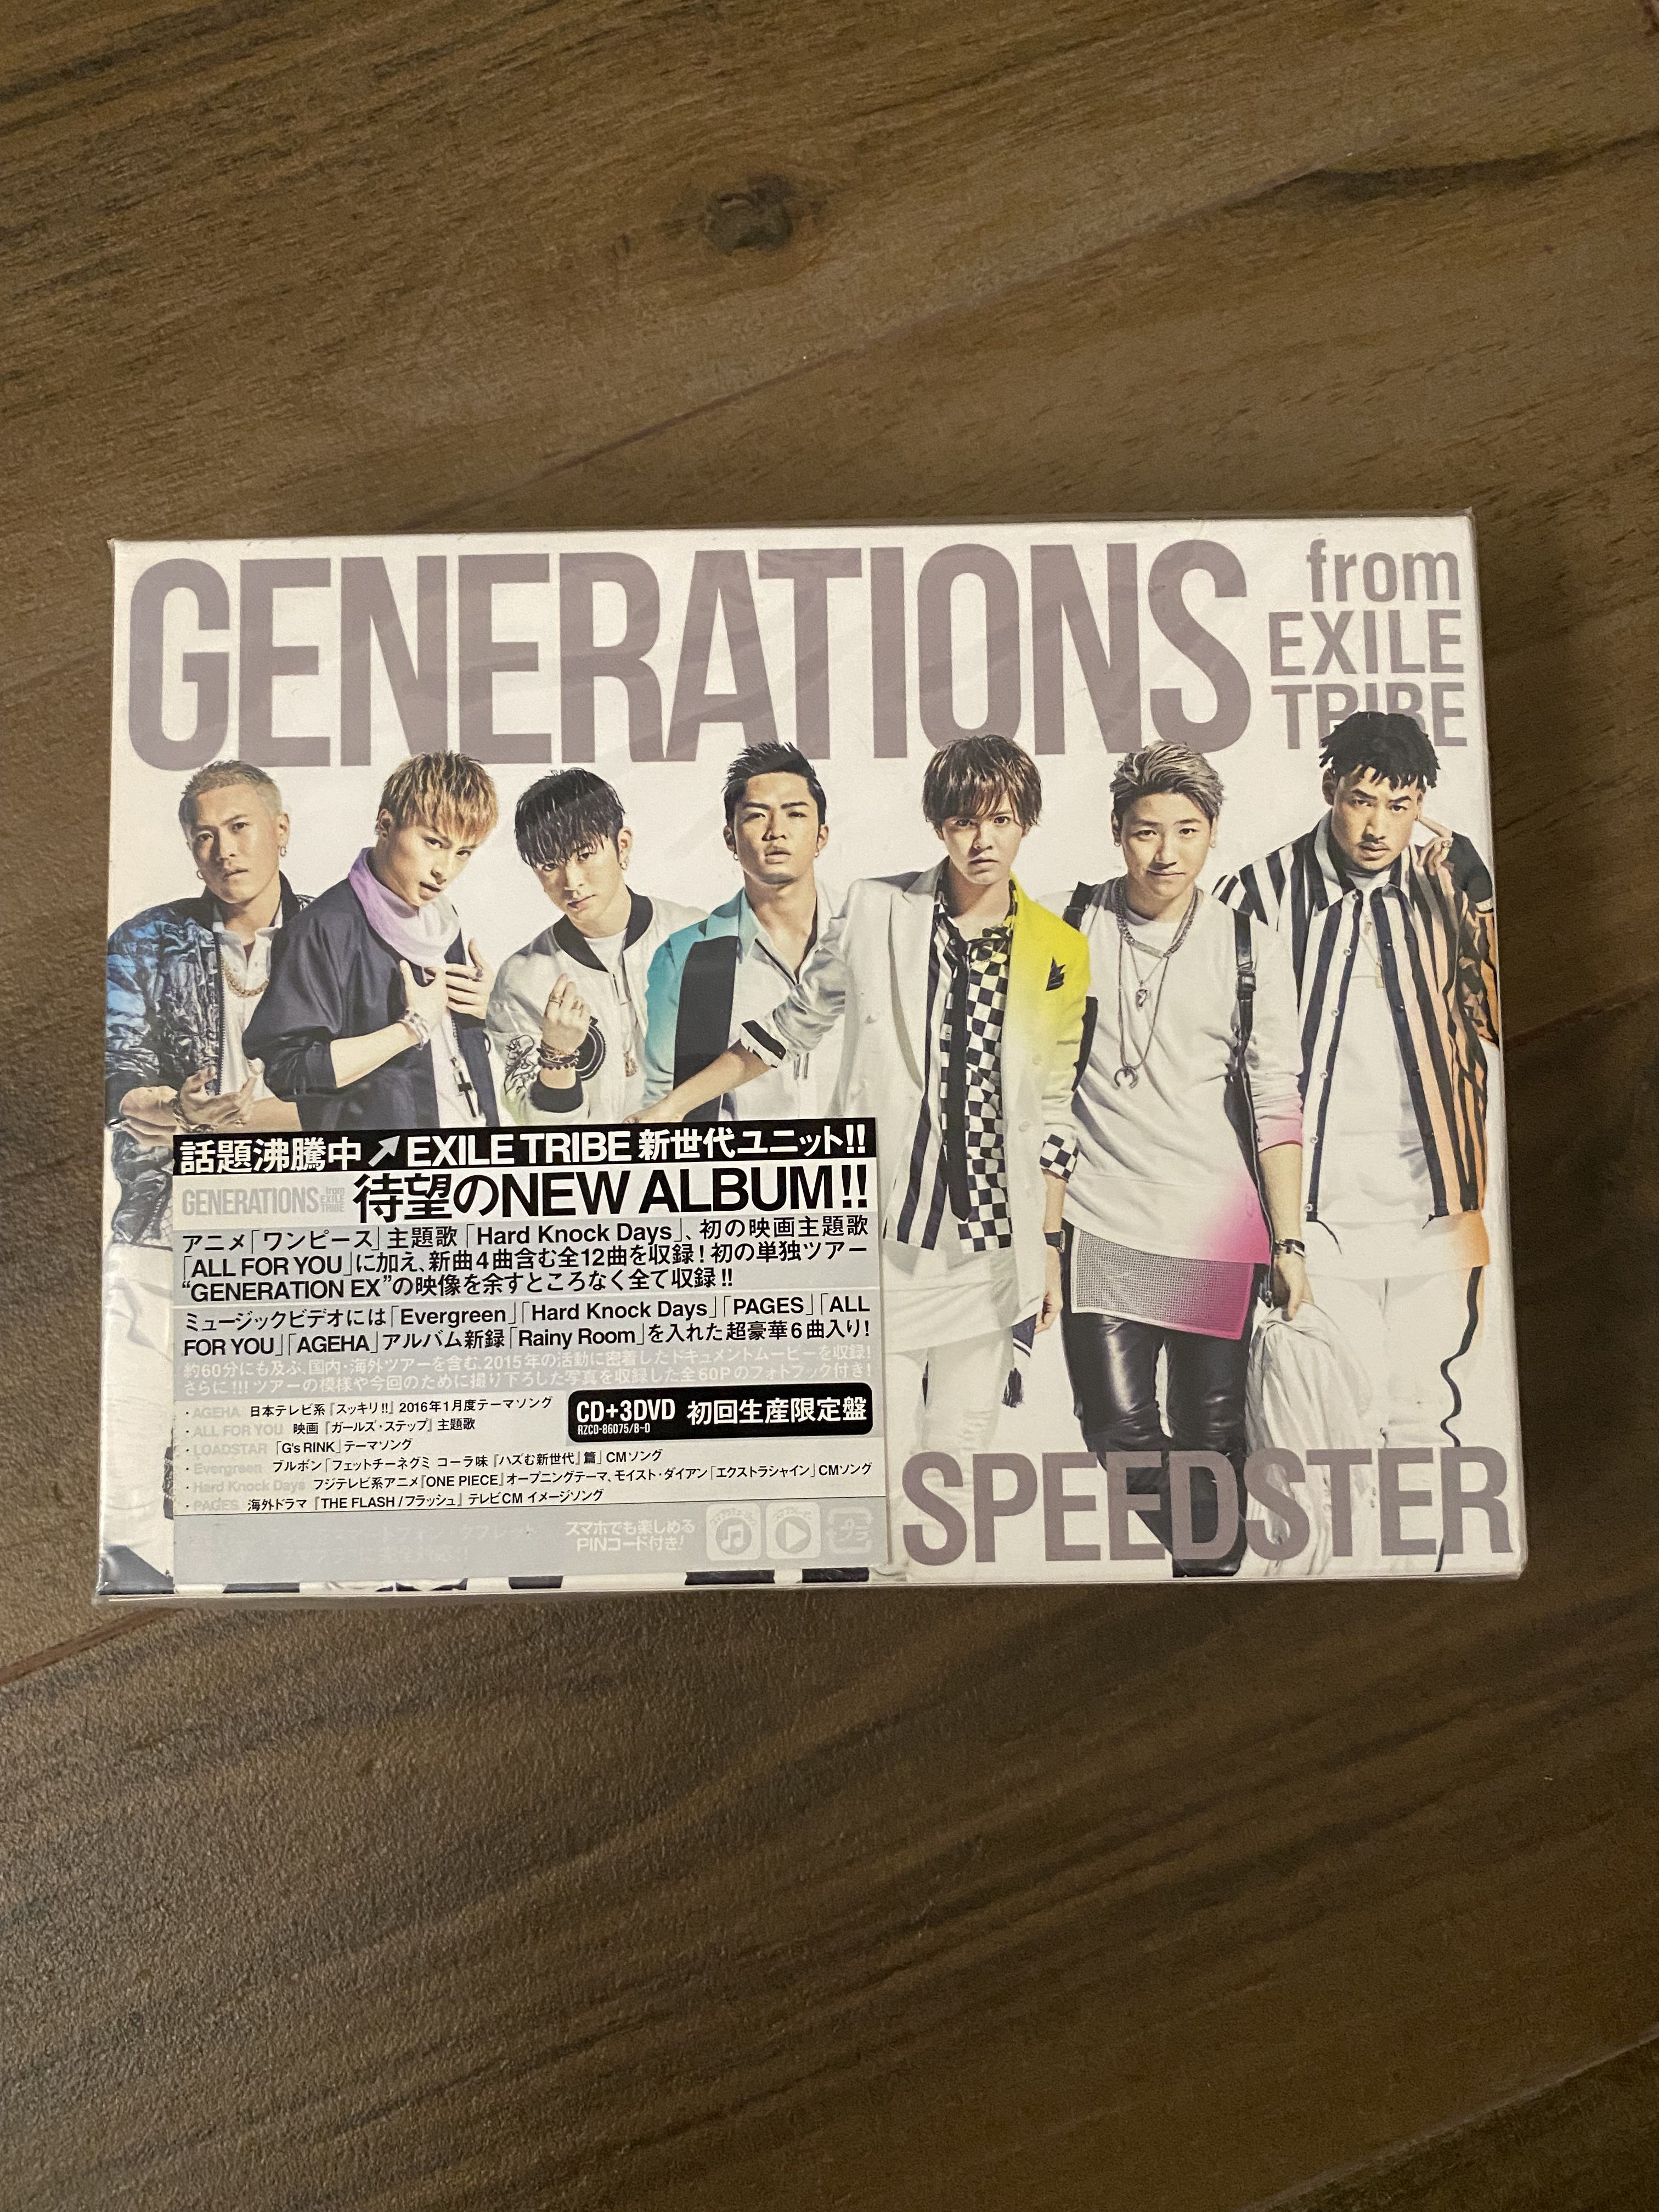 Generations from exile tribe 3rd album speedster 初回生產限定盤CD+